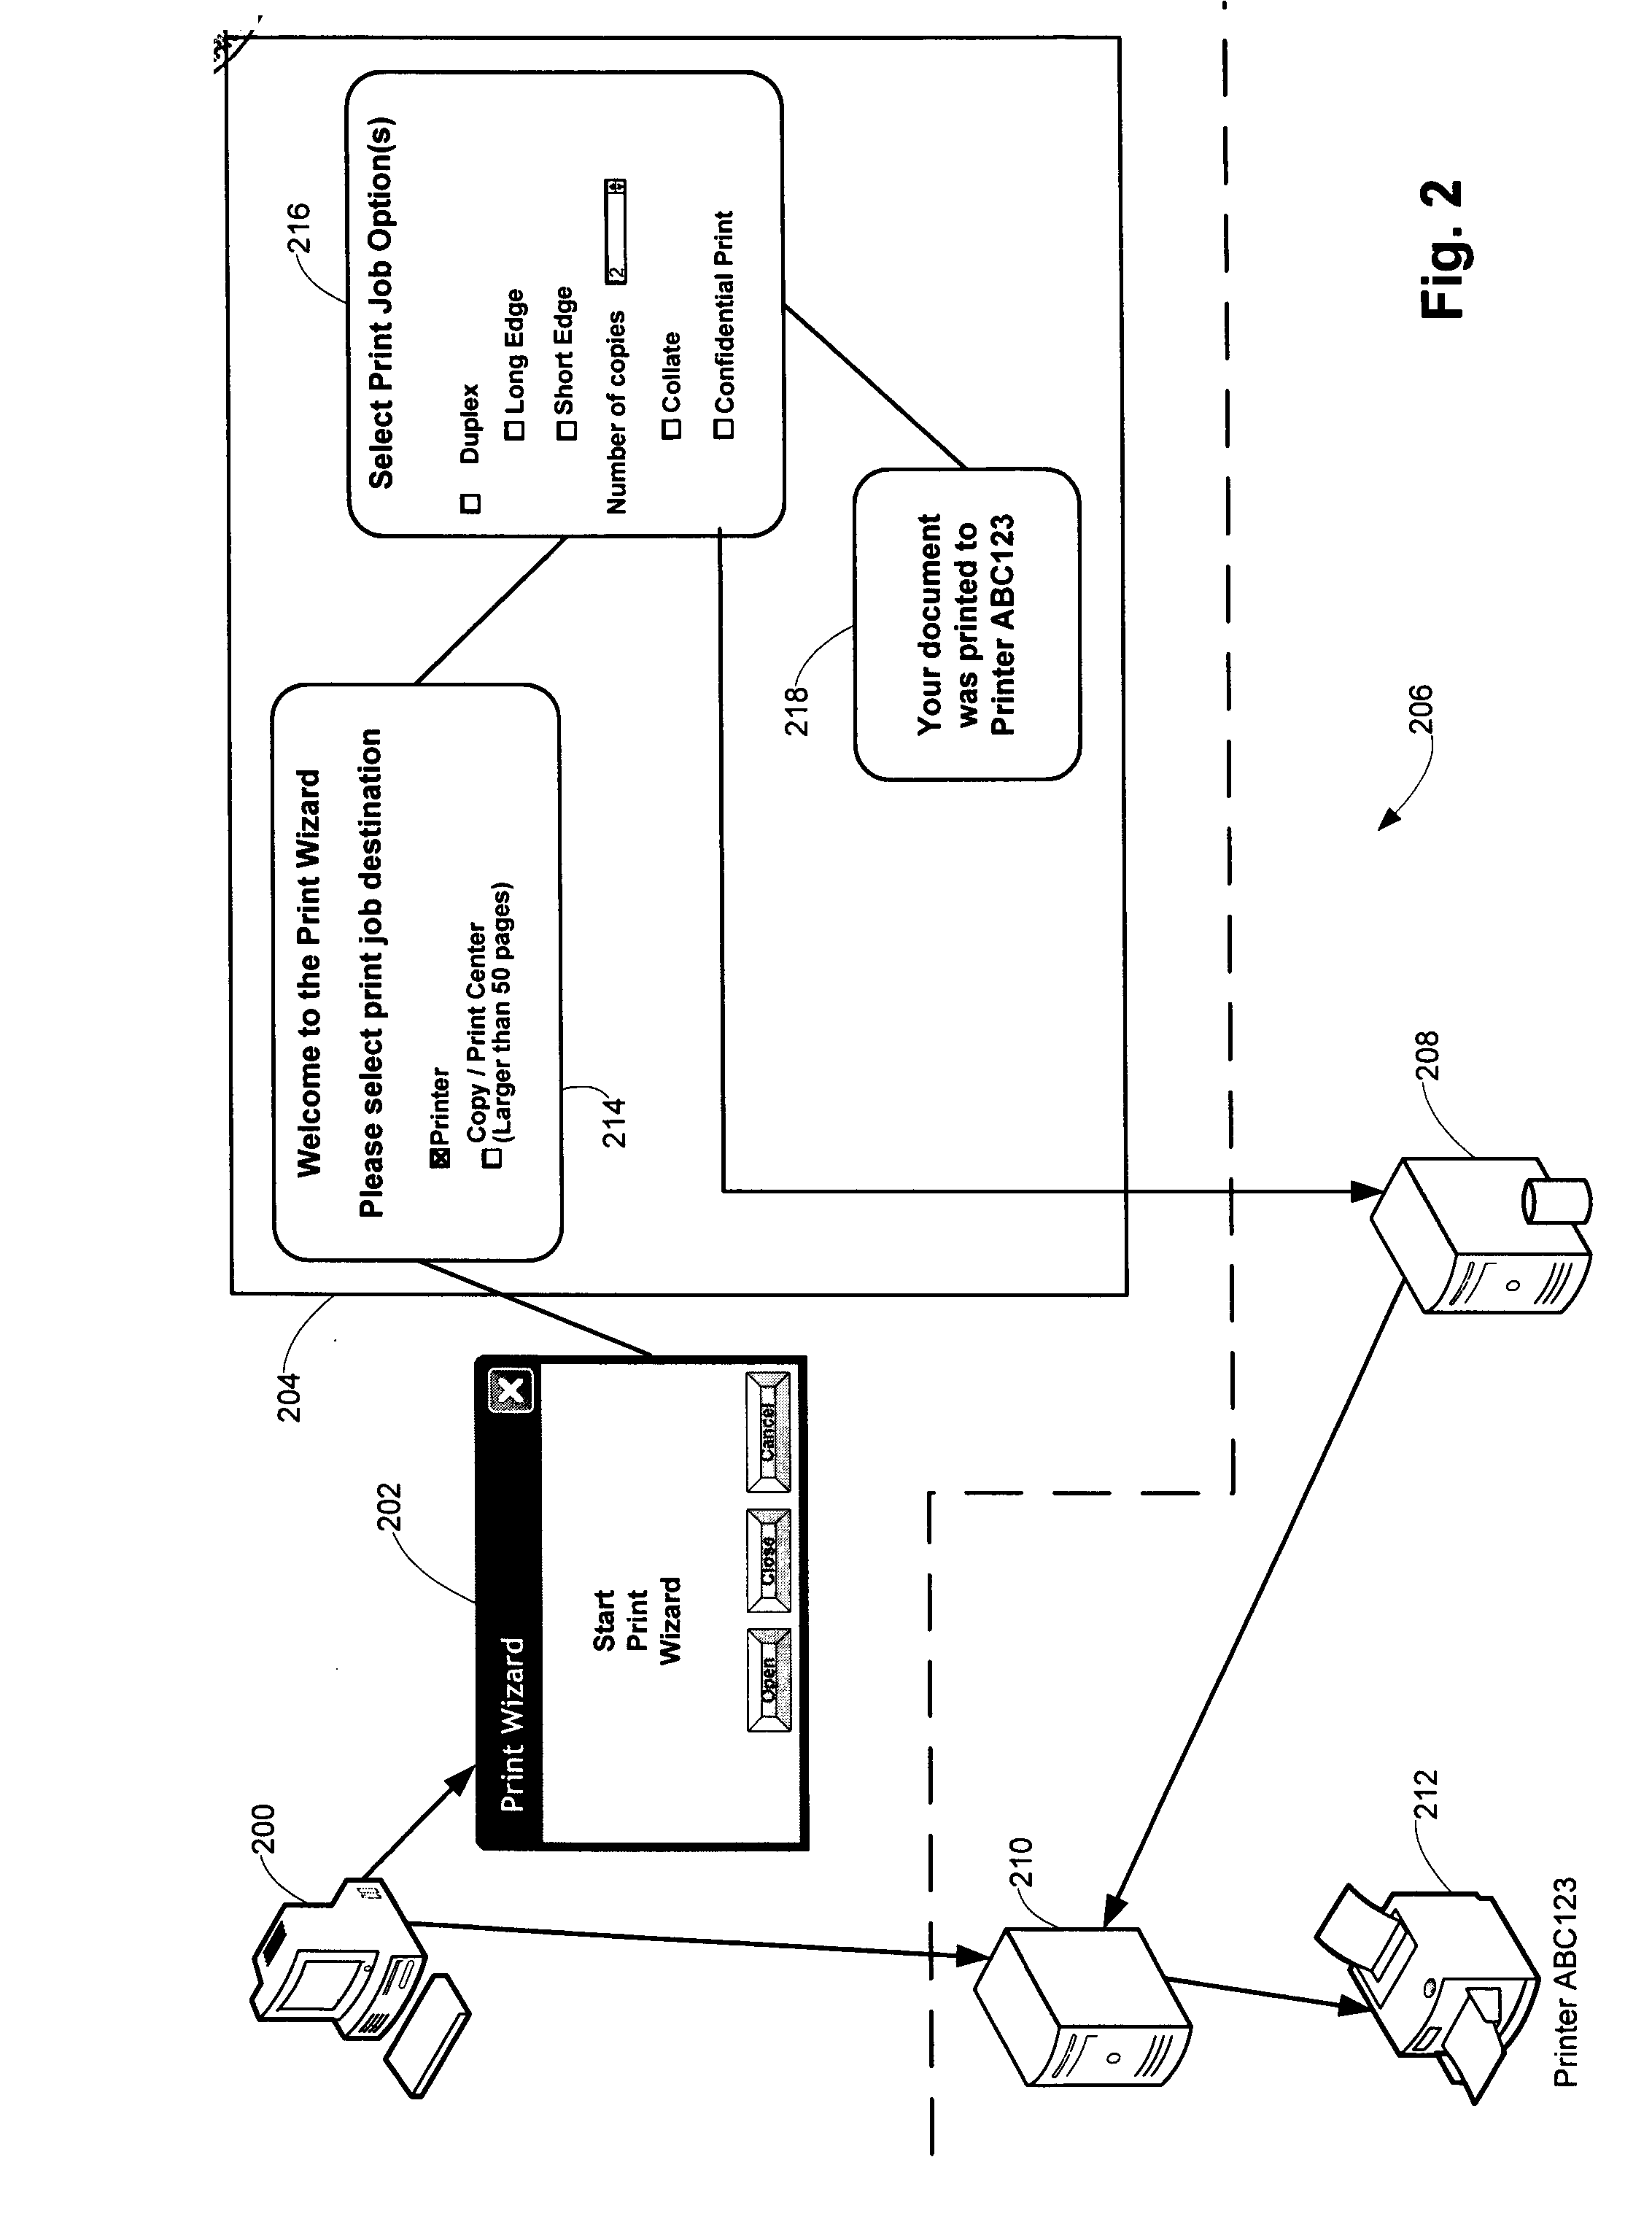 Universal output device control